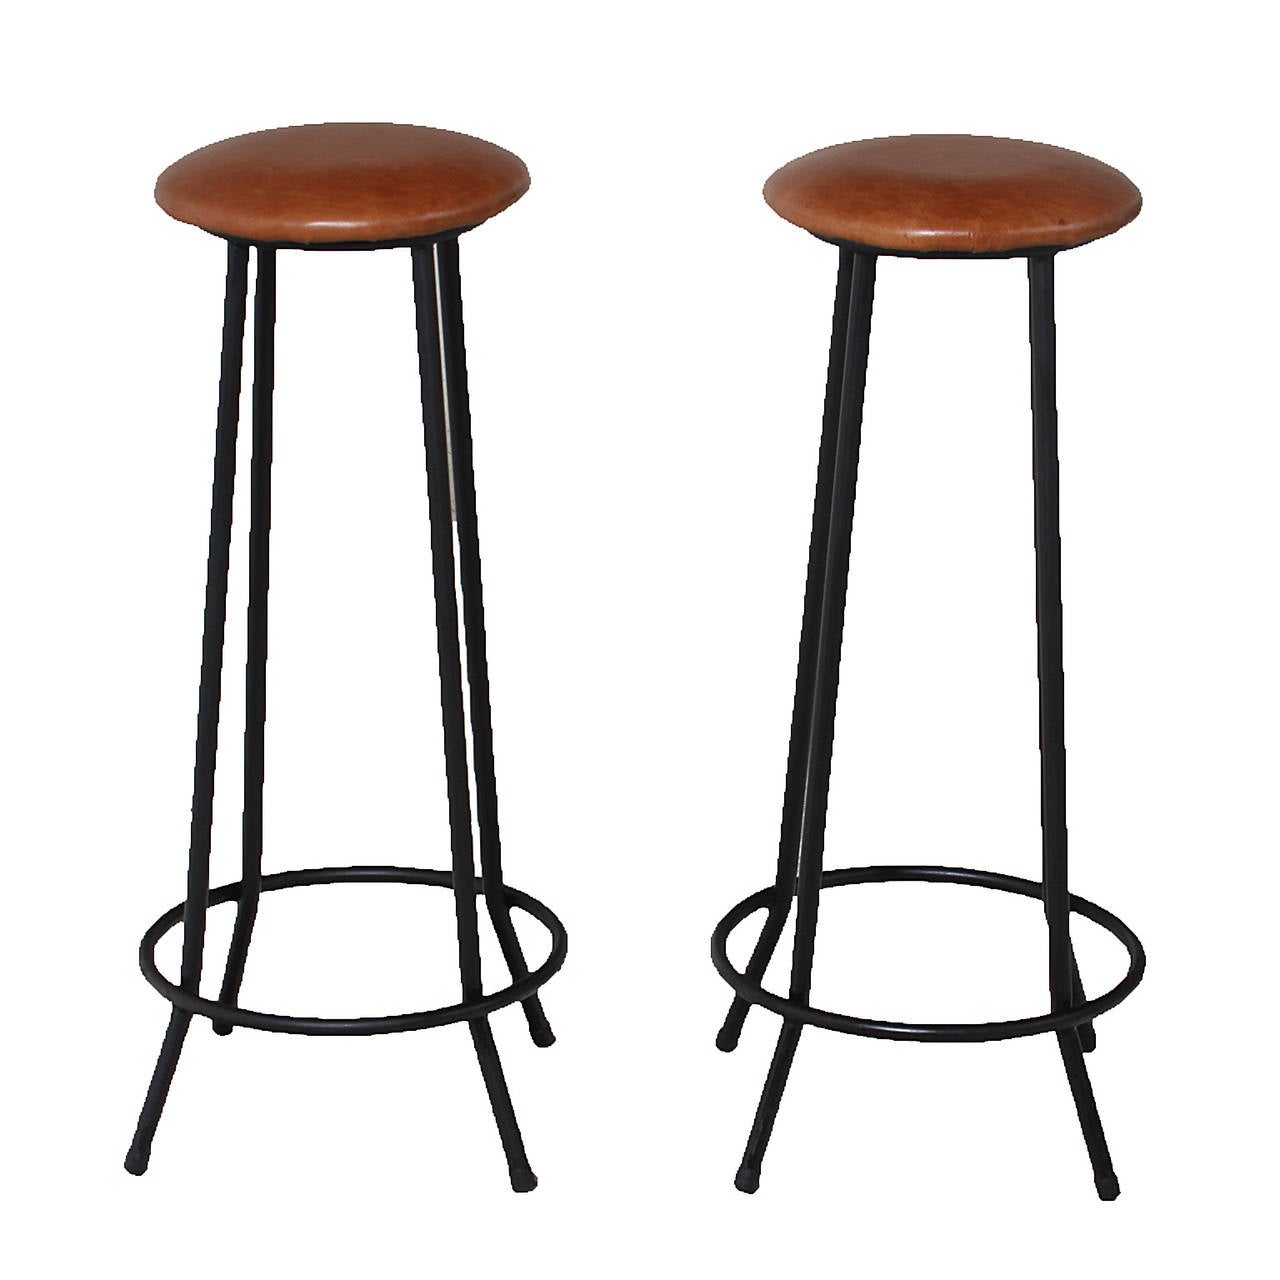 American Midcentury Iron and Leather Stools with Straight and Splayed Legs For Sale